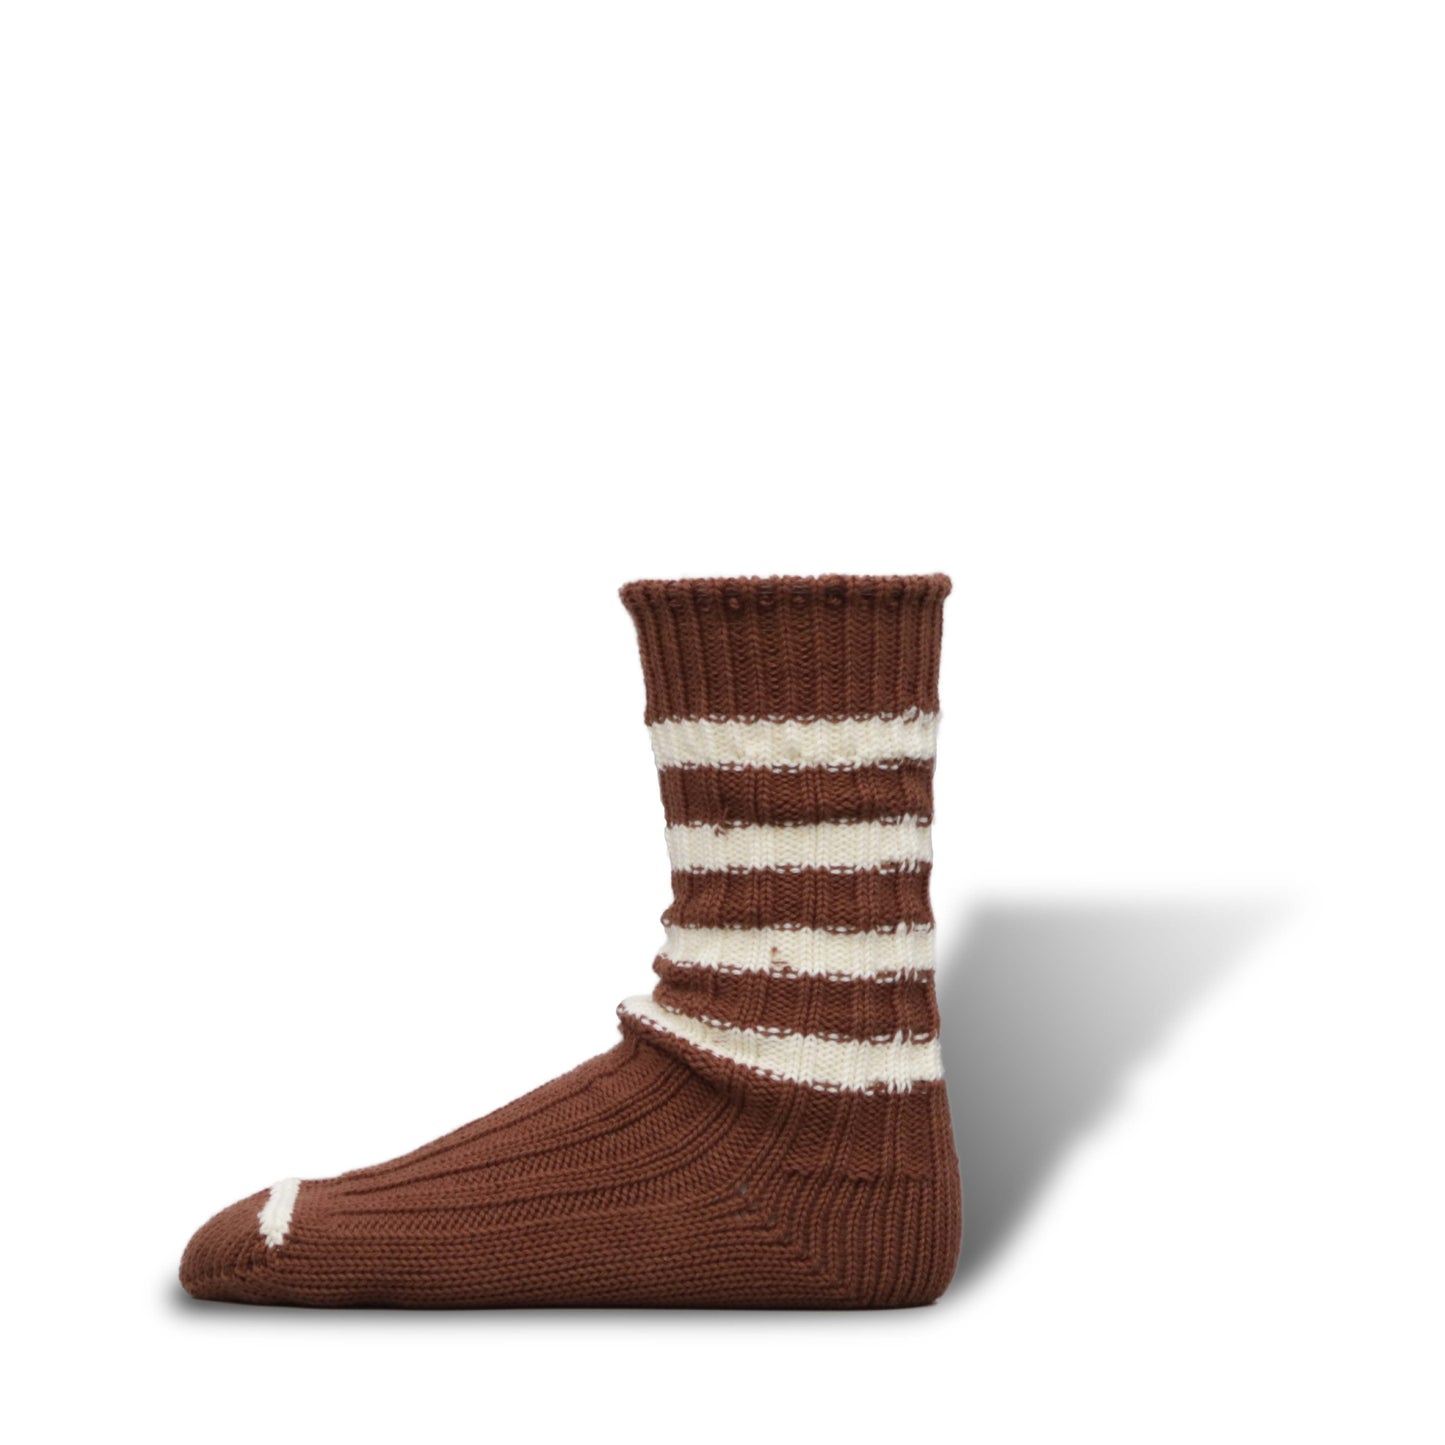 "M.A.P" Heavyweight Socks | Stripes | 1st Collection